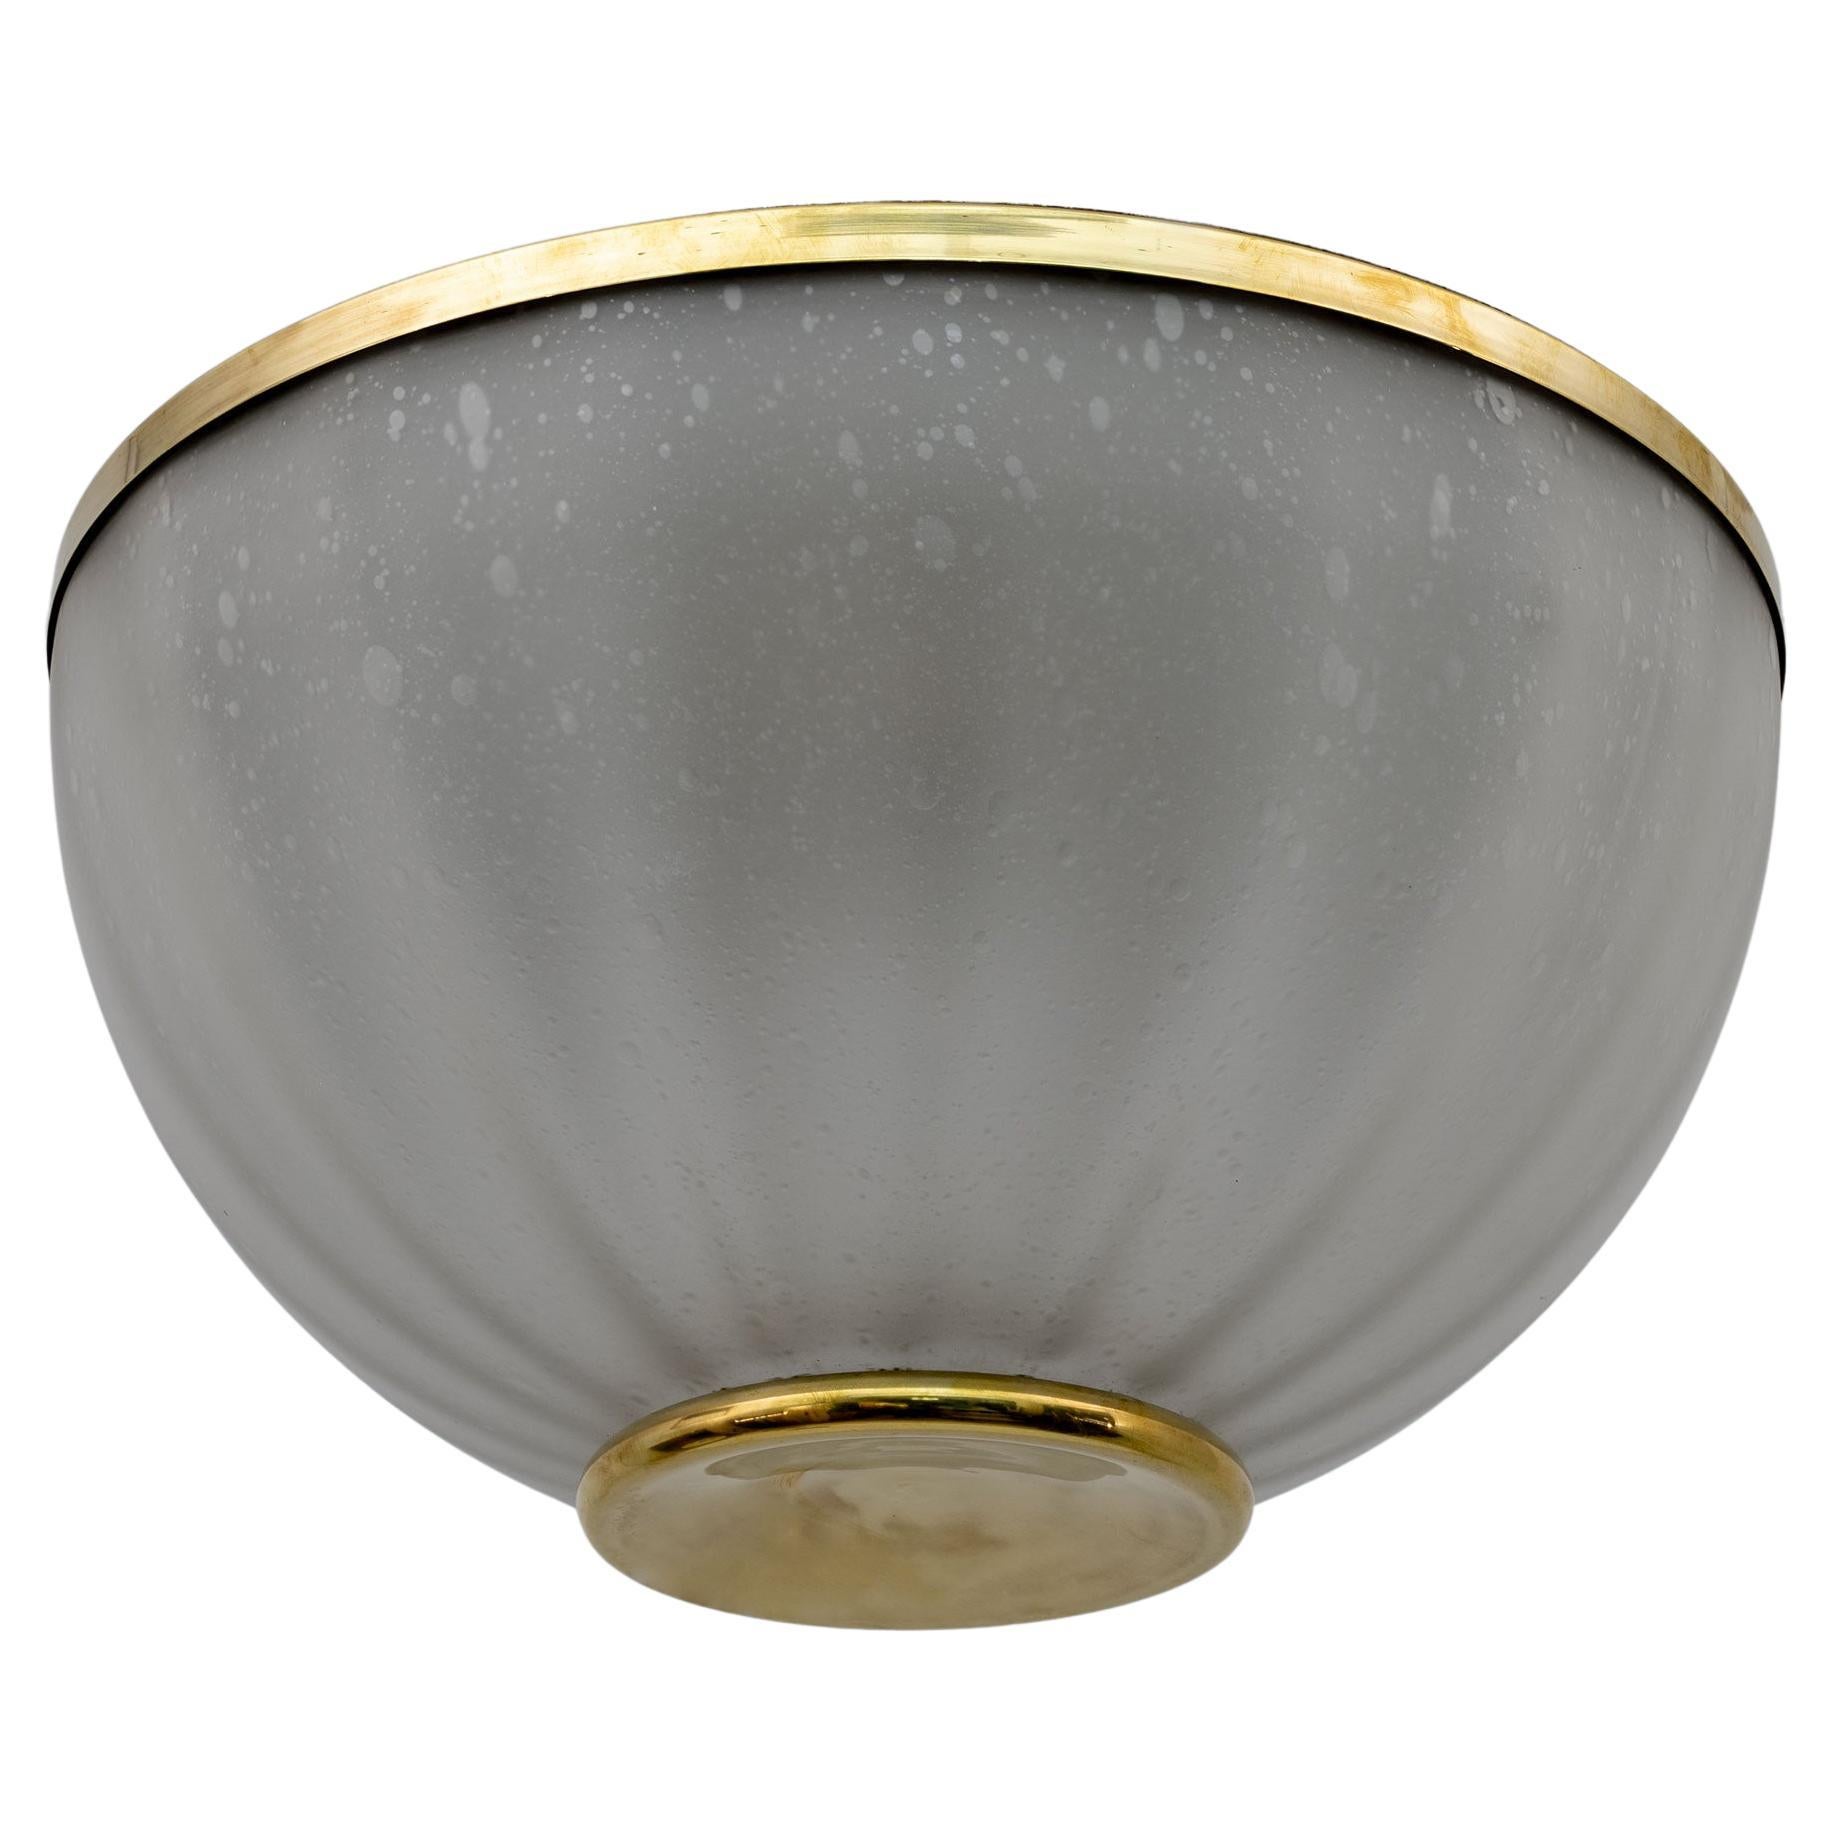 Mid-century Modern Murano Glass and Brass Ceiling Light, 1970s For Sale